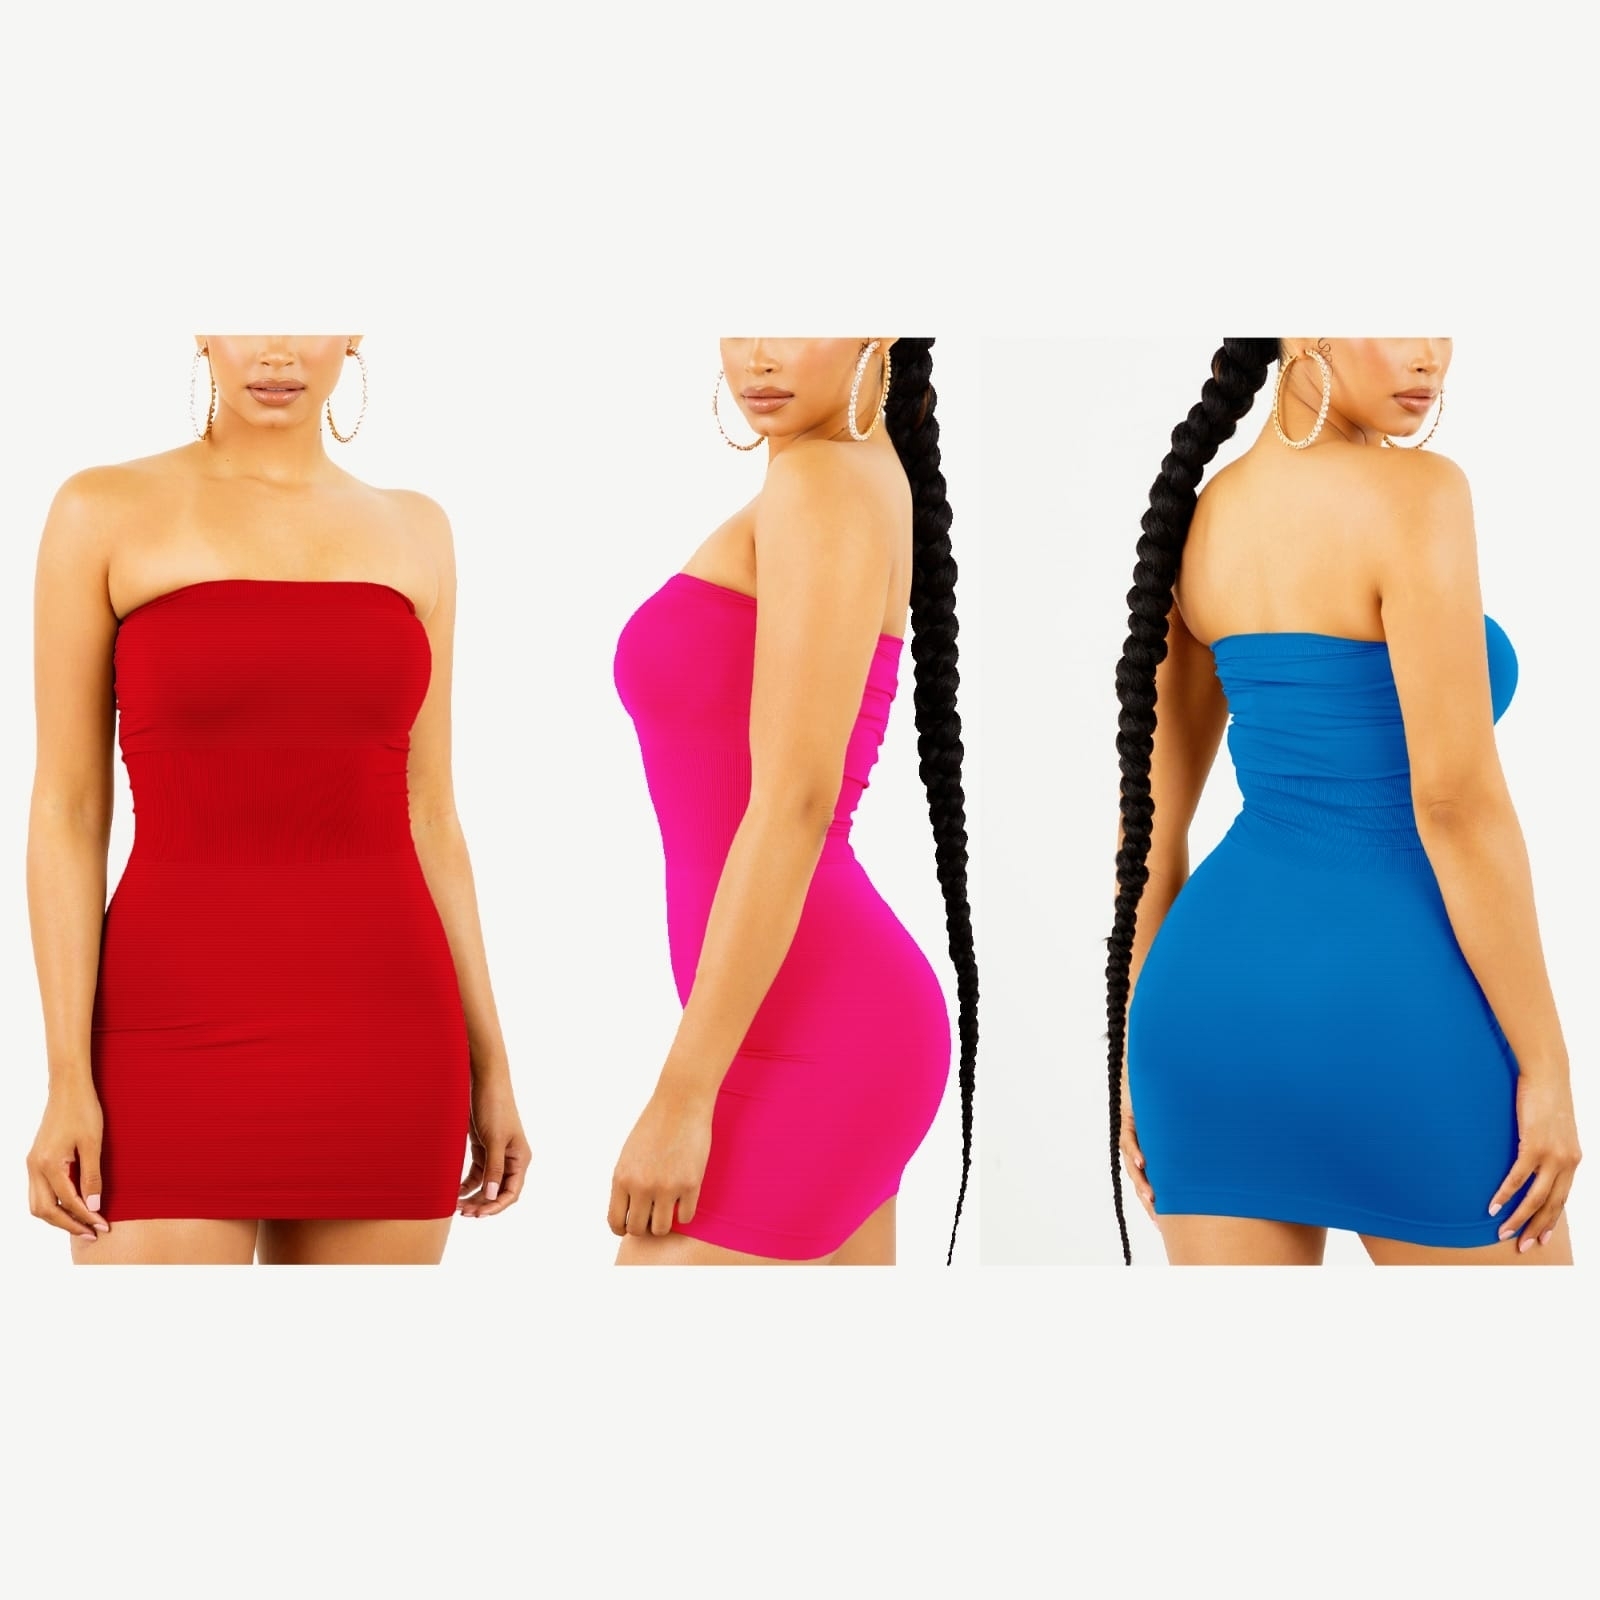 2-Pack Women's Strapless Stretchy Tight Fit Seamless Body Con Mini Tube Top Dress - RED, 2XL